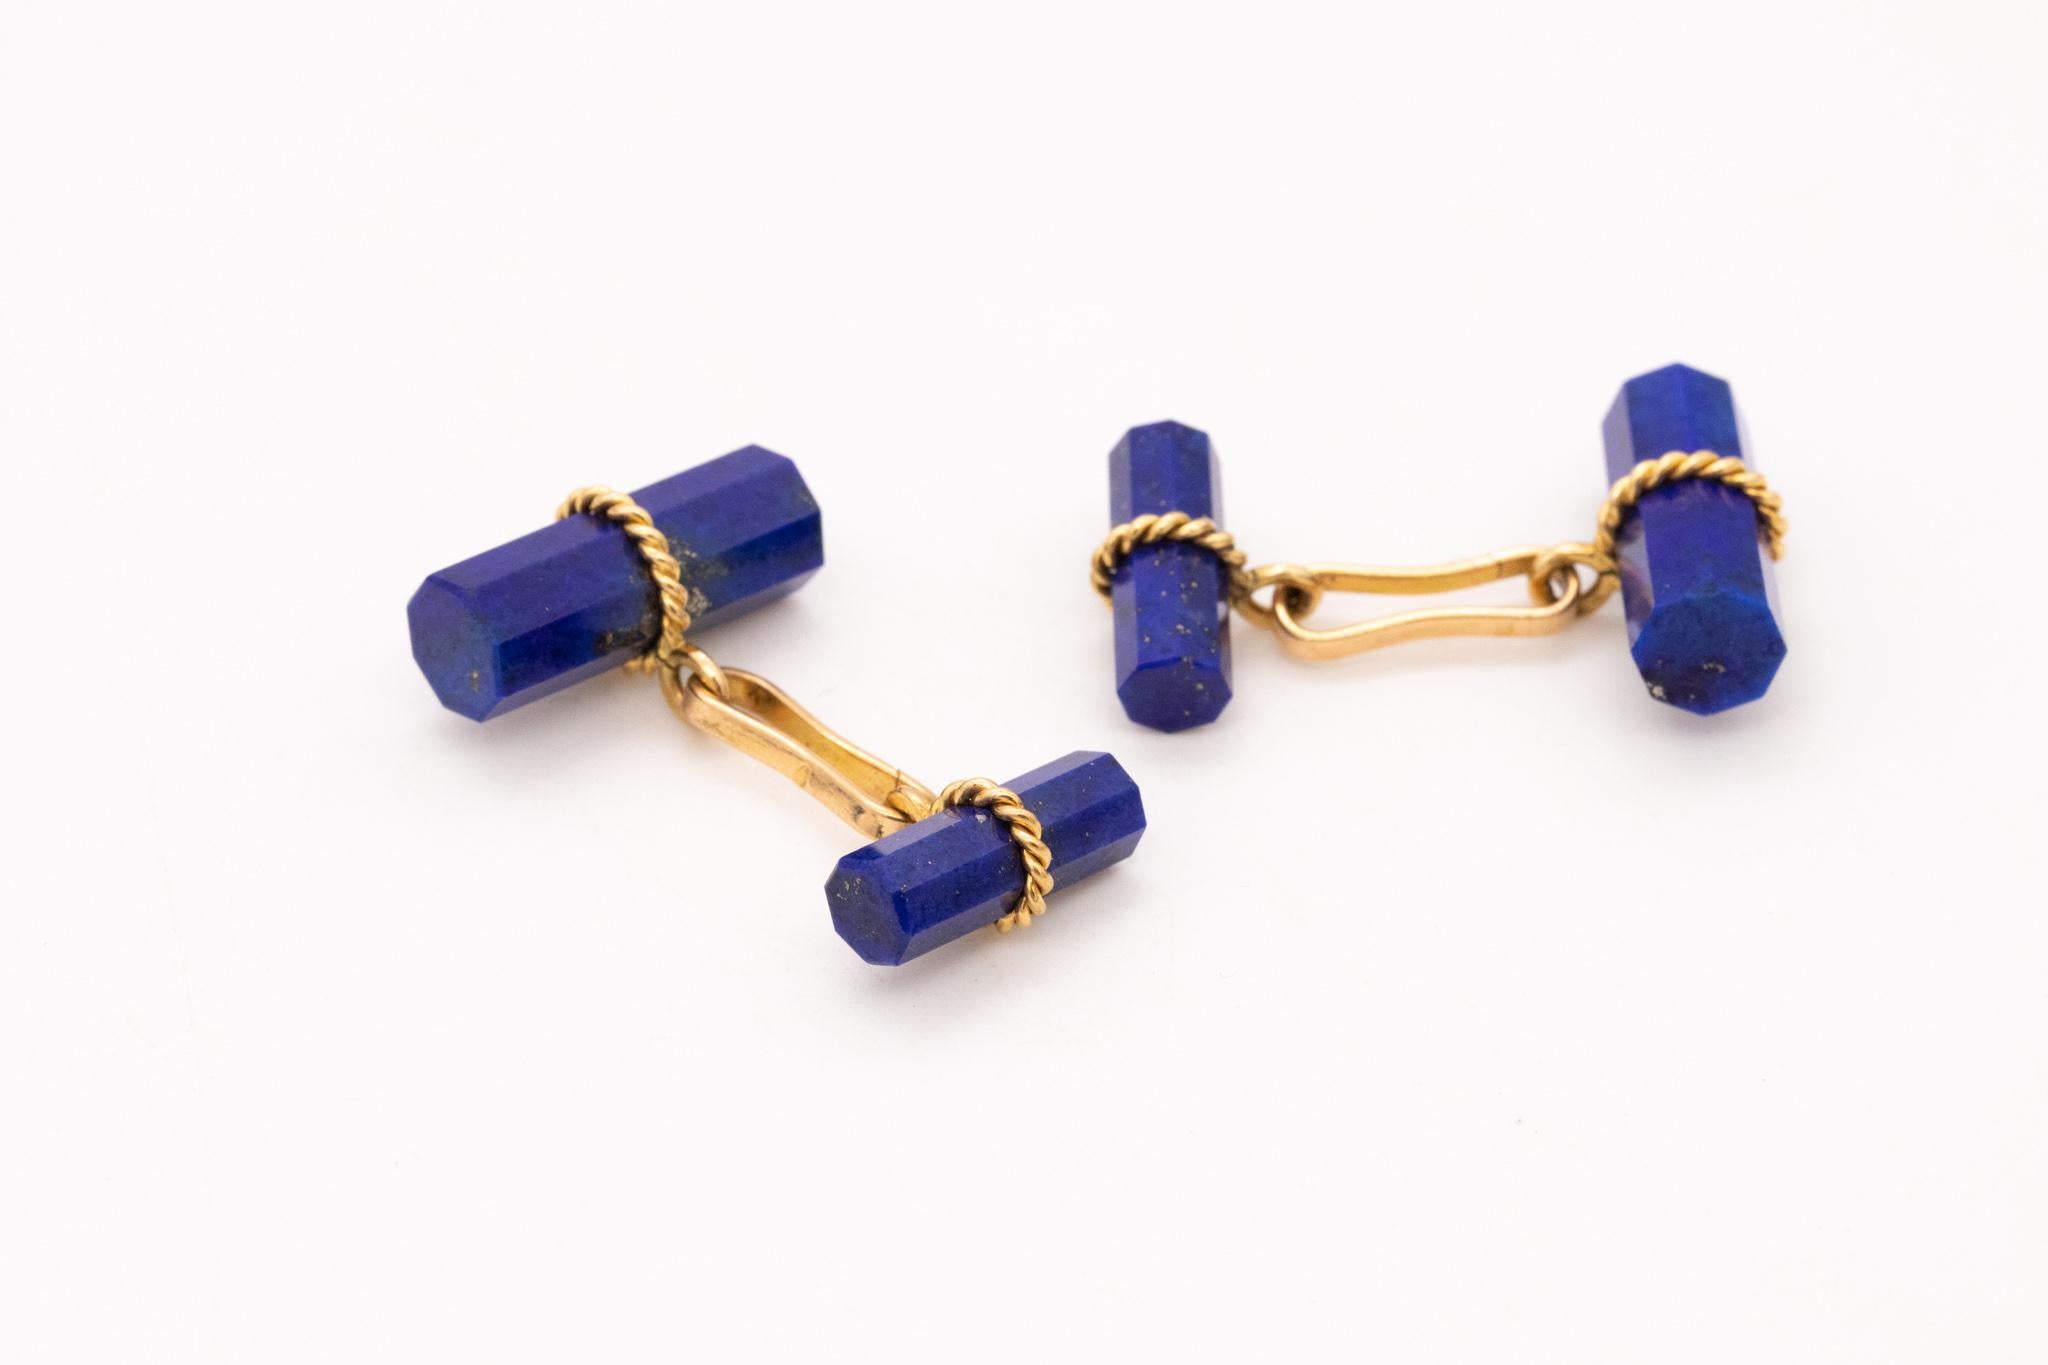 Hexagon Cut Marchak 1960 Paris Links Cufflinks with Afghani Blue Lapis Lazuli in 18Kt Gold For Sale